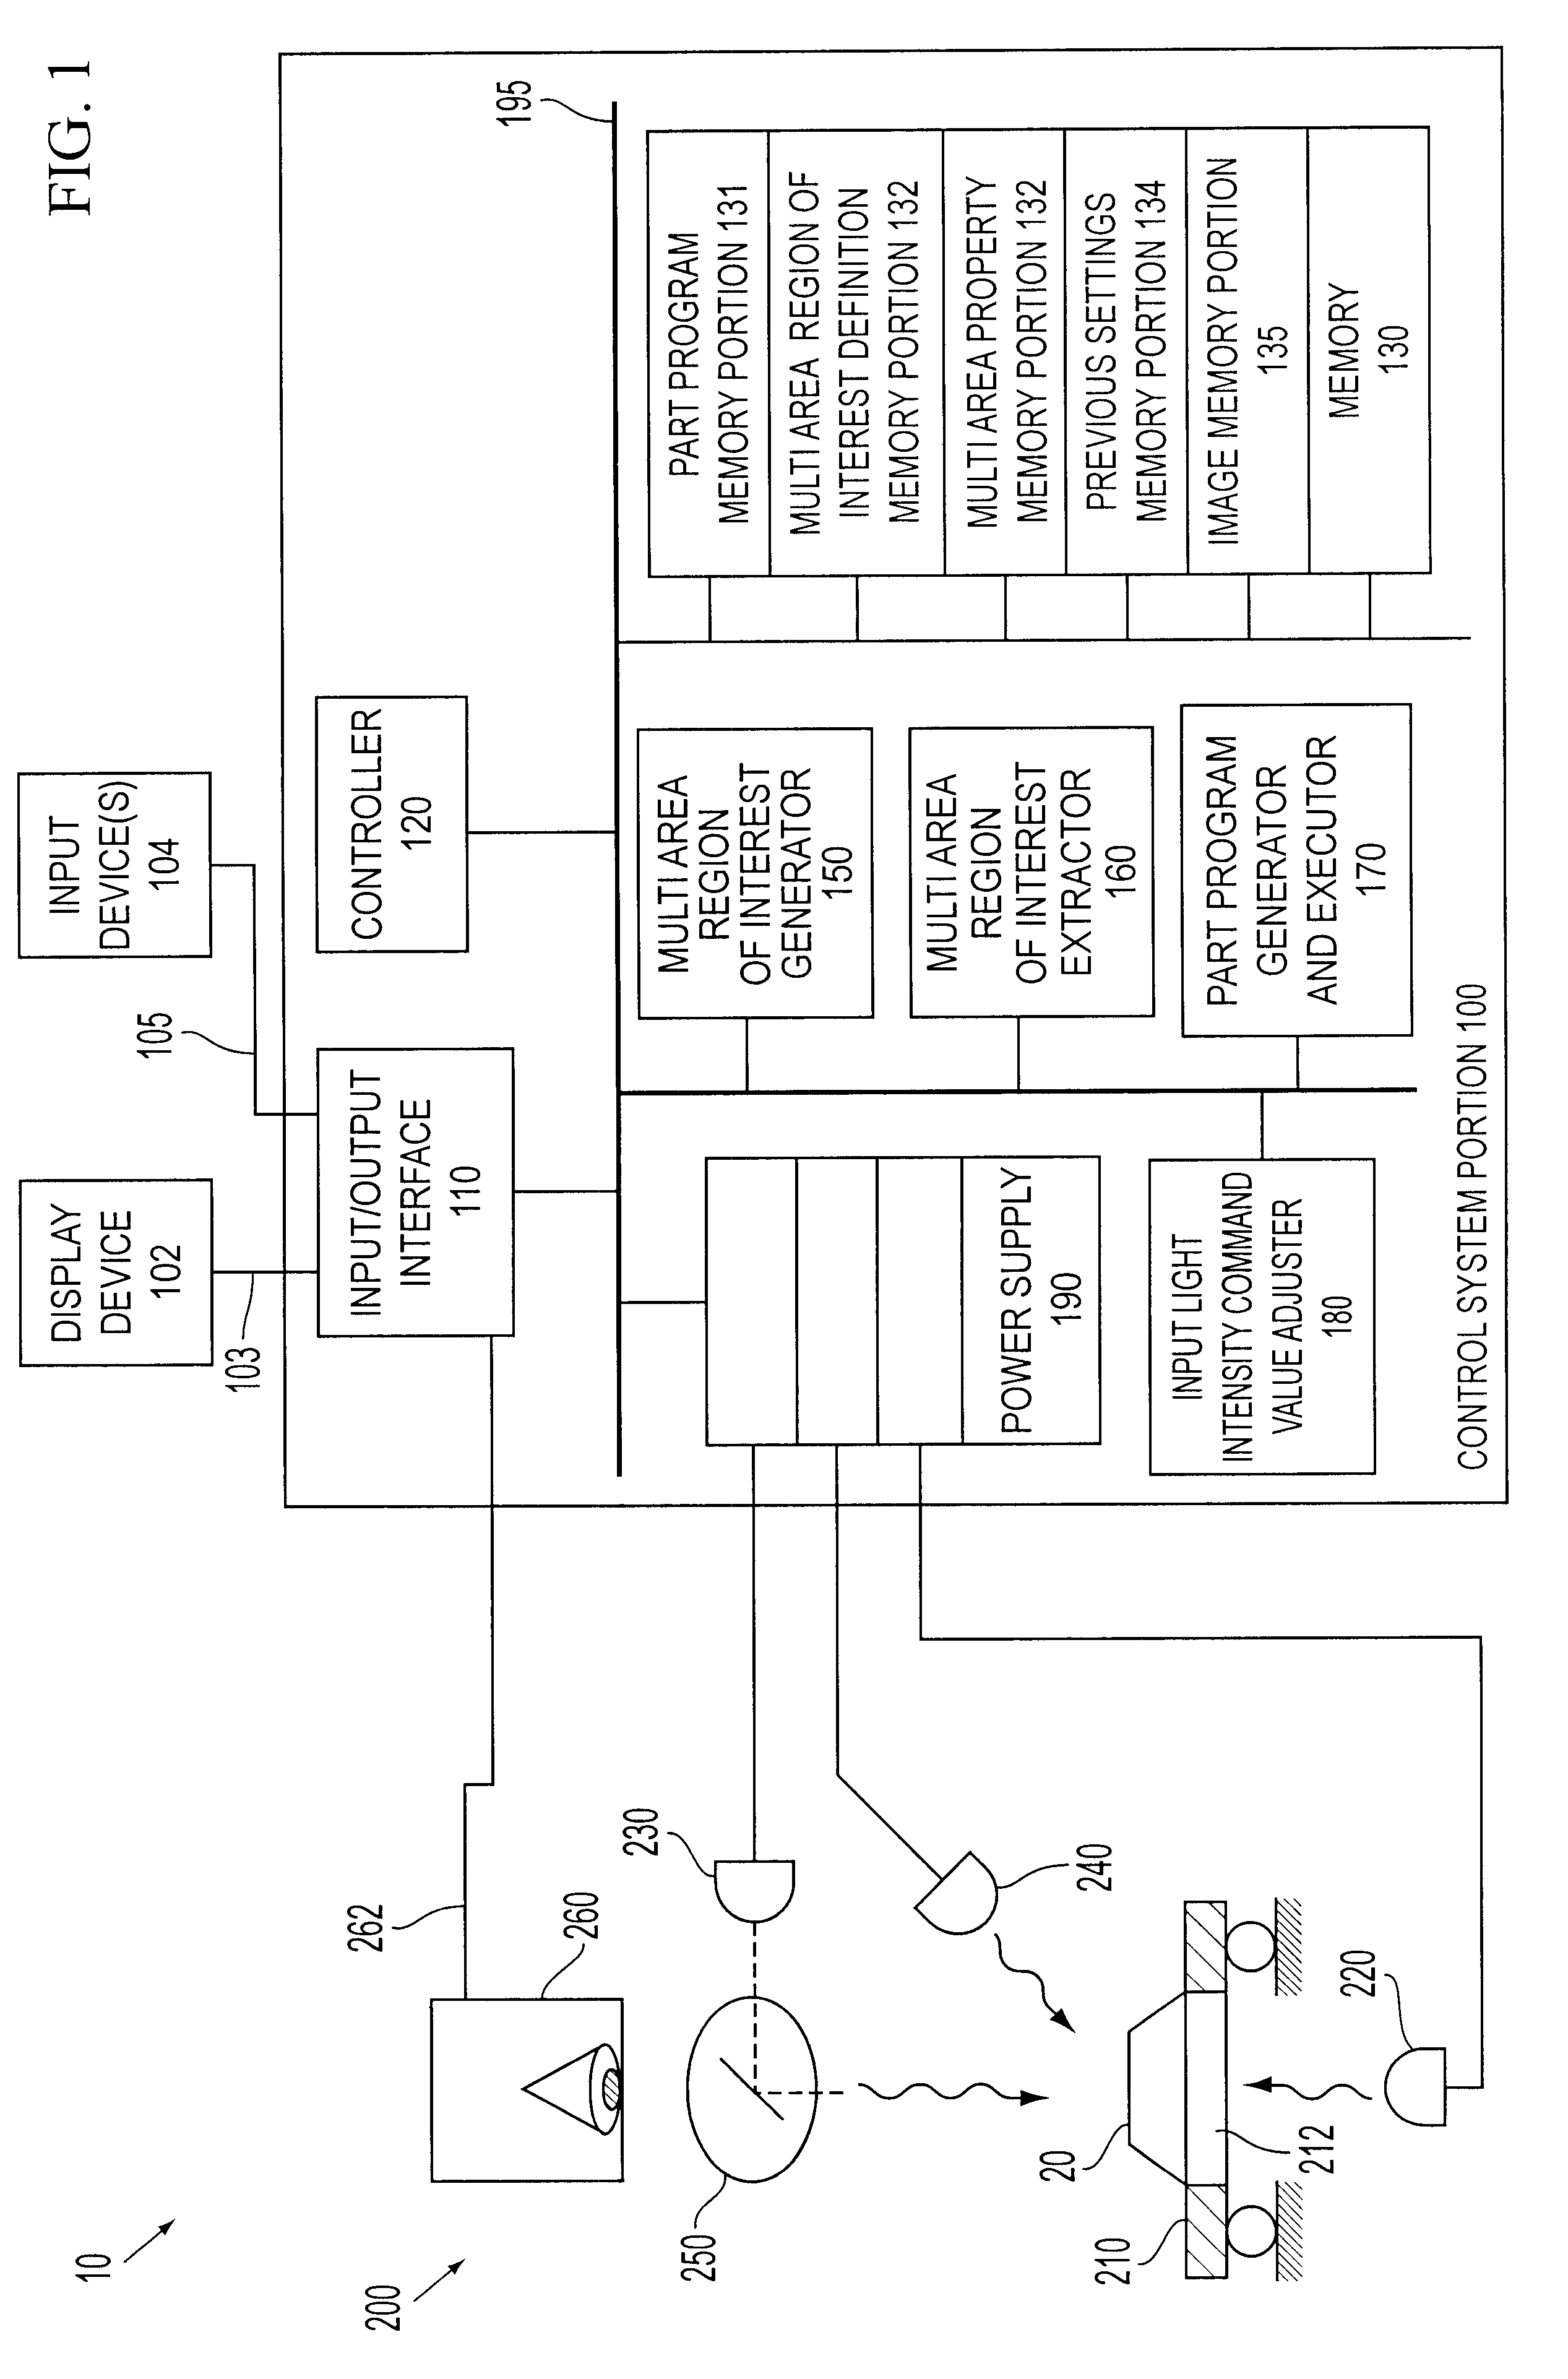 Systems and methods for adjusting lighting of a part based on a plurality of selected regions of an image of the part